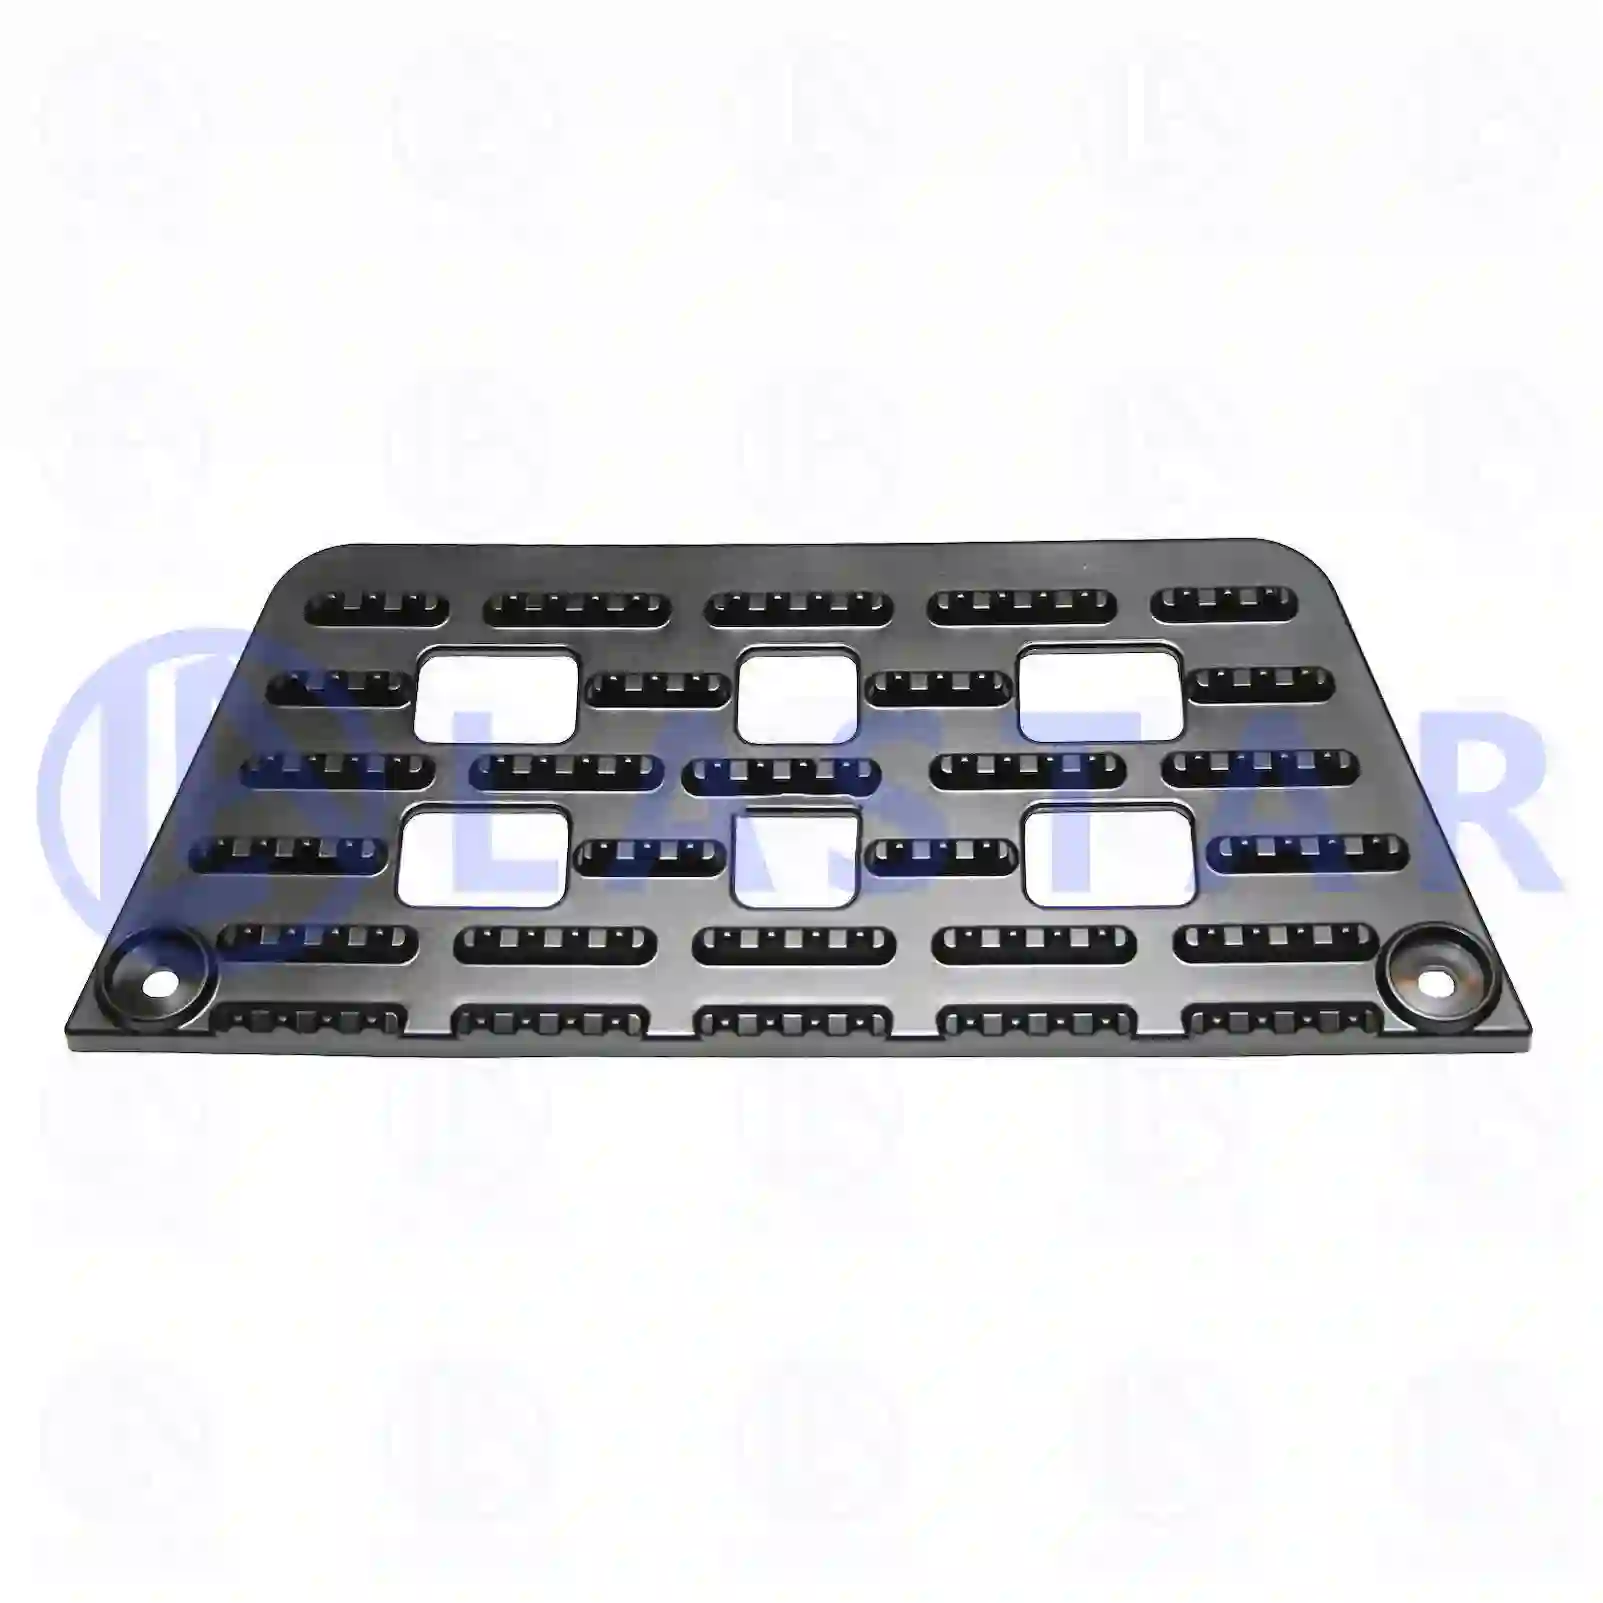 Step, 77718821, 4006660028, 9436660028, ZG61127-0008 ||  77718821 Lastar Spare Part | Truck Spare Parts, Auotomotive Spare Parts Step, 77718821, 4006660028, 9436660028, ZG61127-0008 ||  77718821 Lastar Spare Part | Truck Spare Parts, Auotomotive Spare Parts